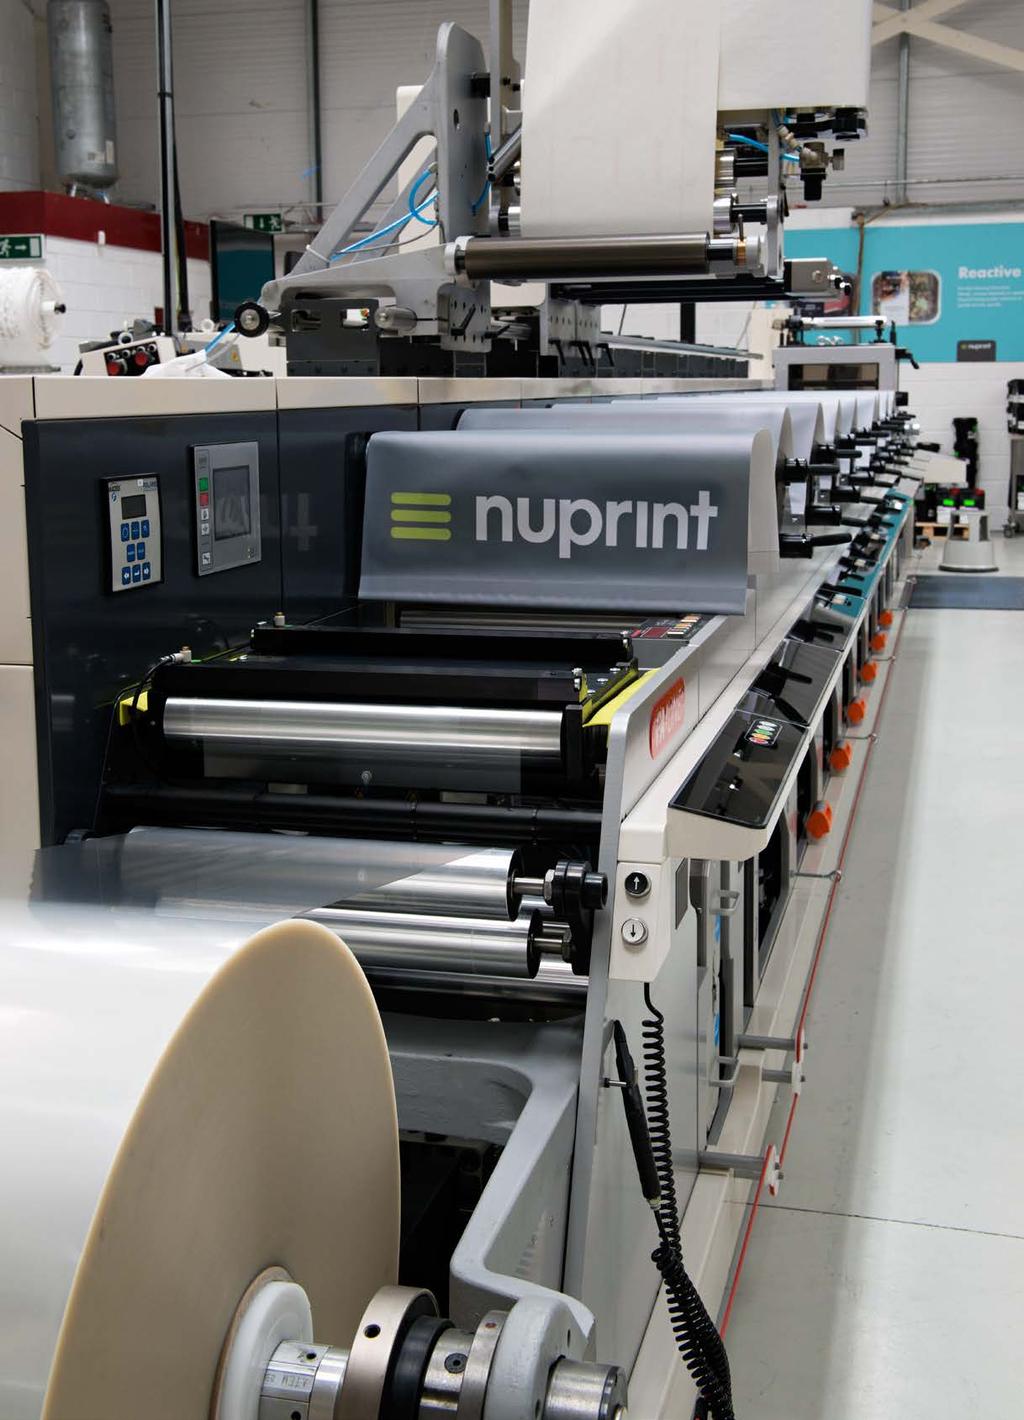 Over the last 30 years, Nuprint might have made their mark